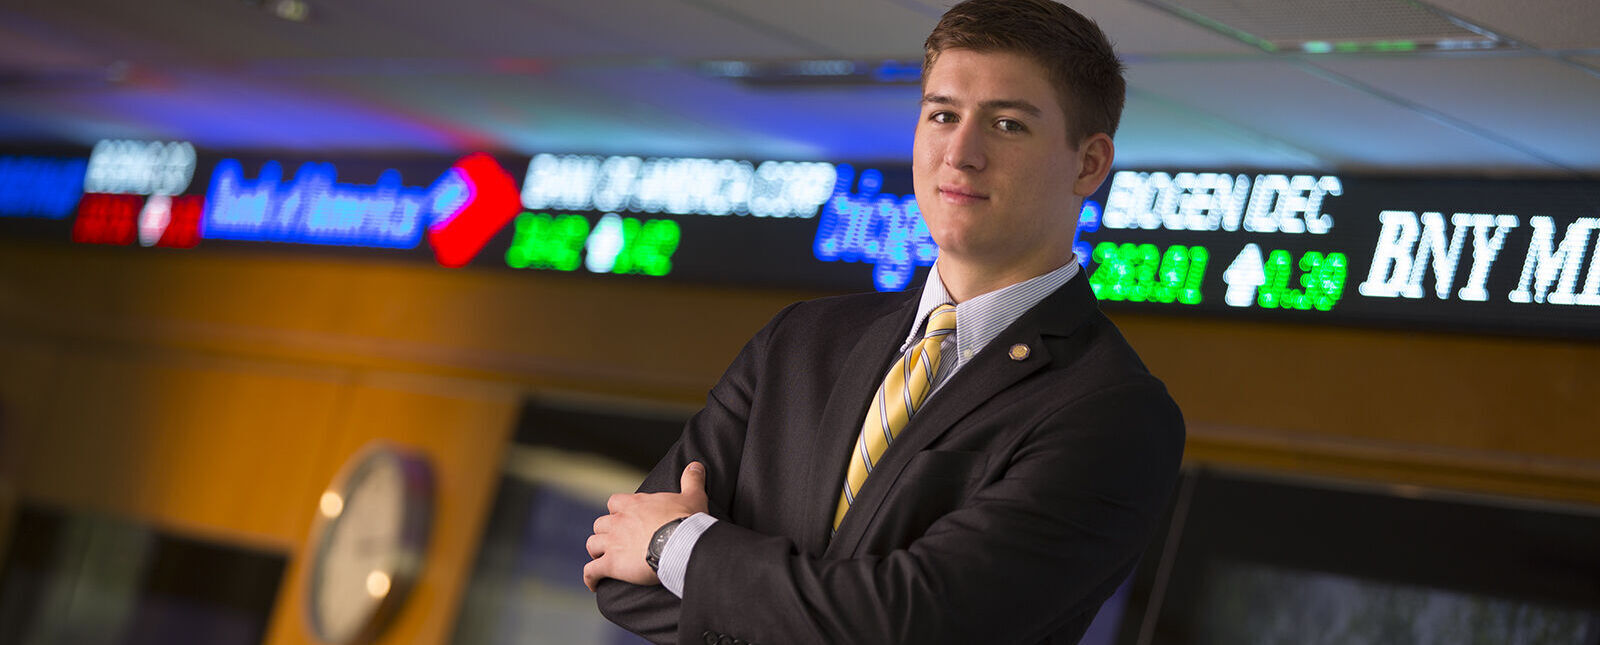 A male student poses in a business suit with arms crossed in the Malesardi Finance Trading Room